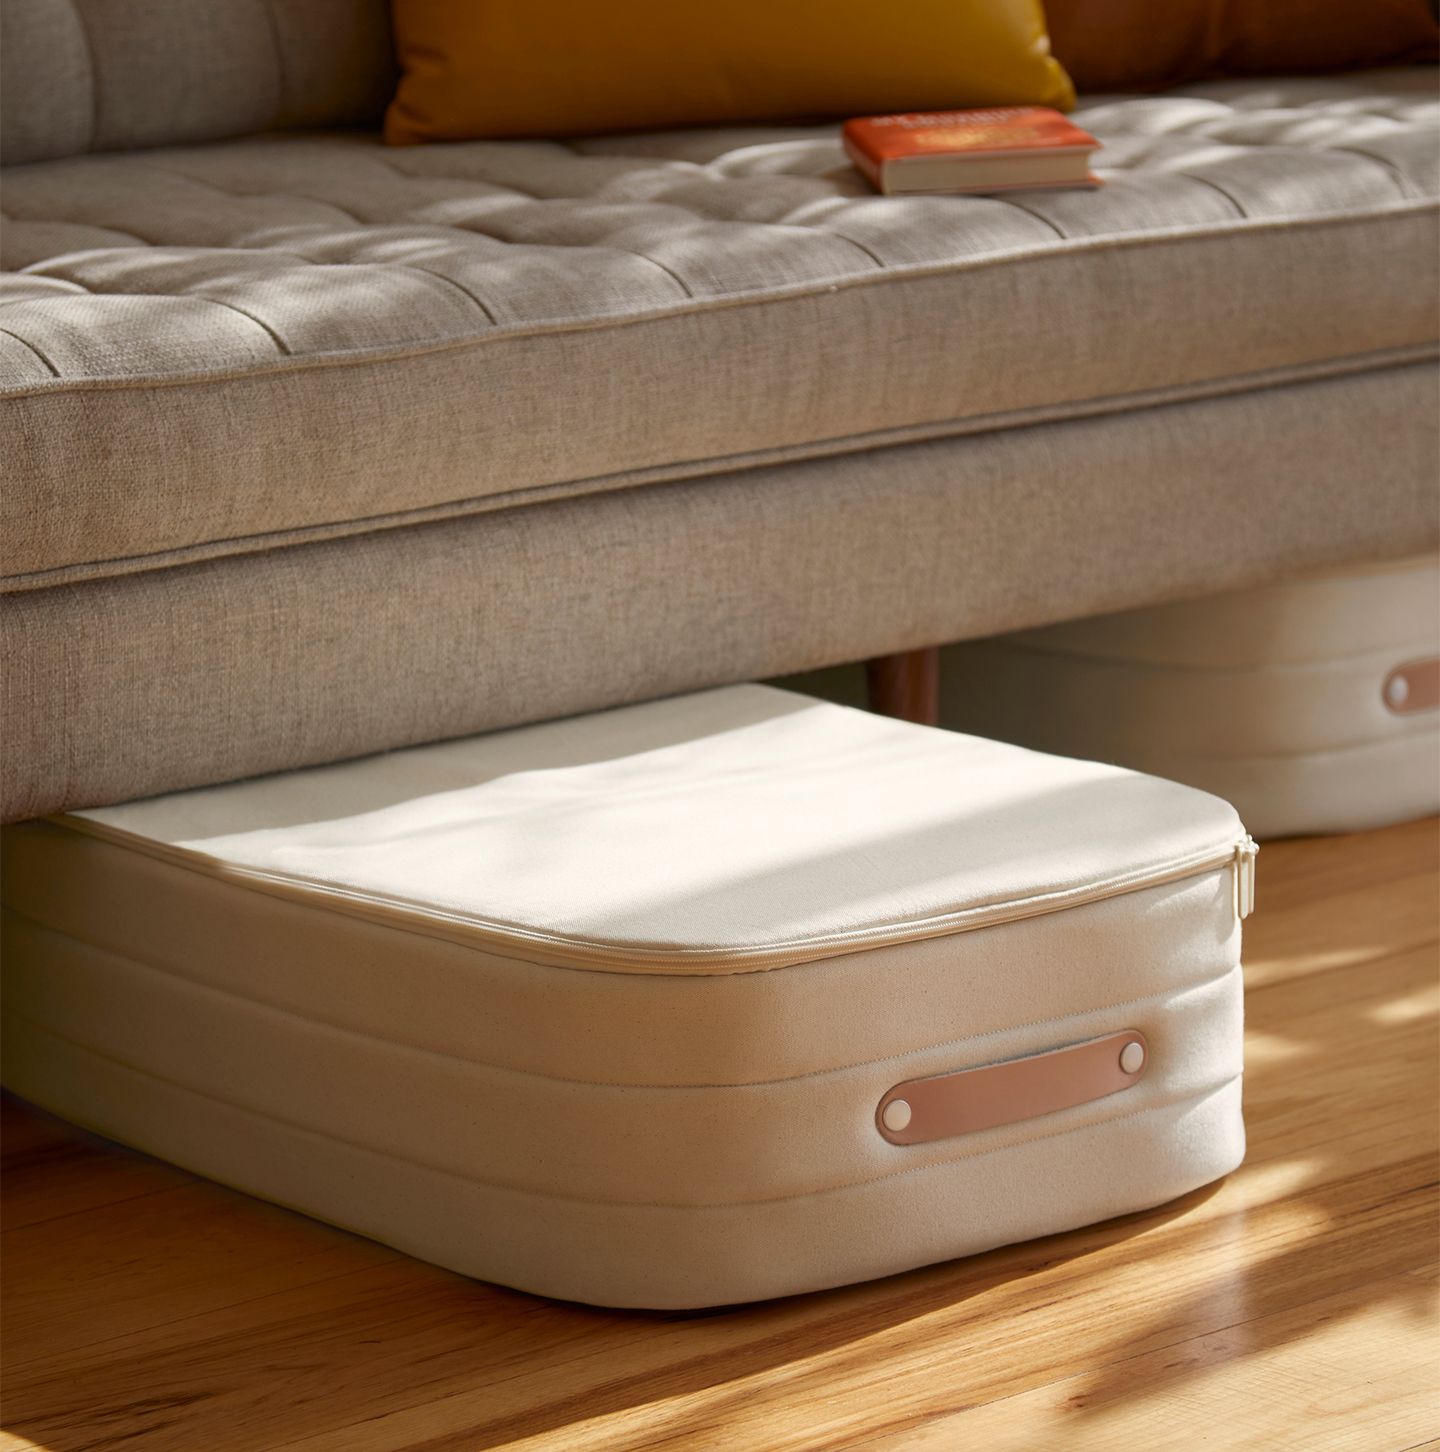 The new cream Underbed Storage coming out from underneath a couch.